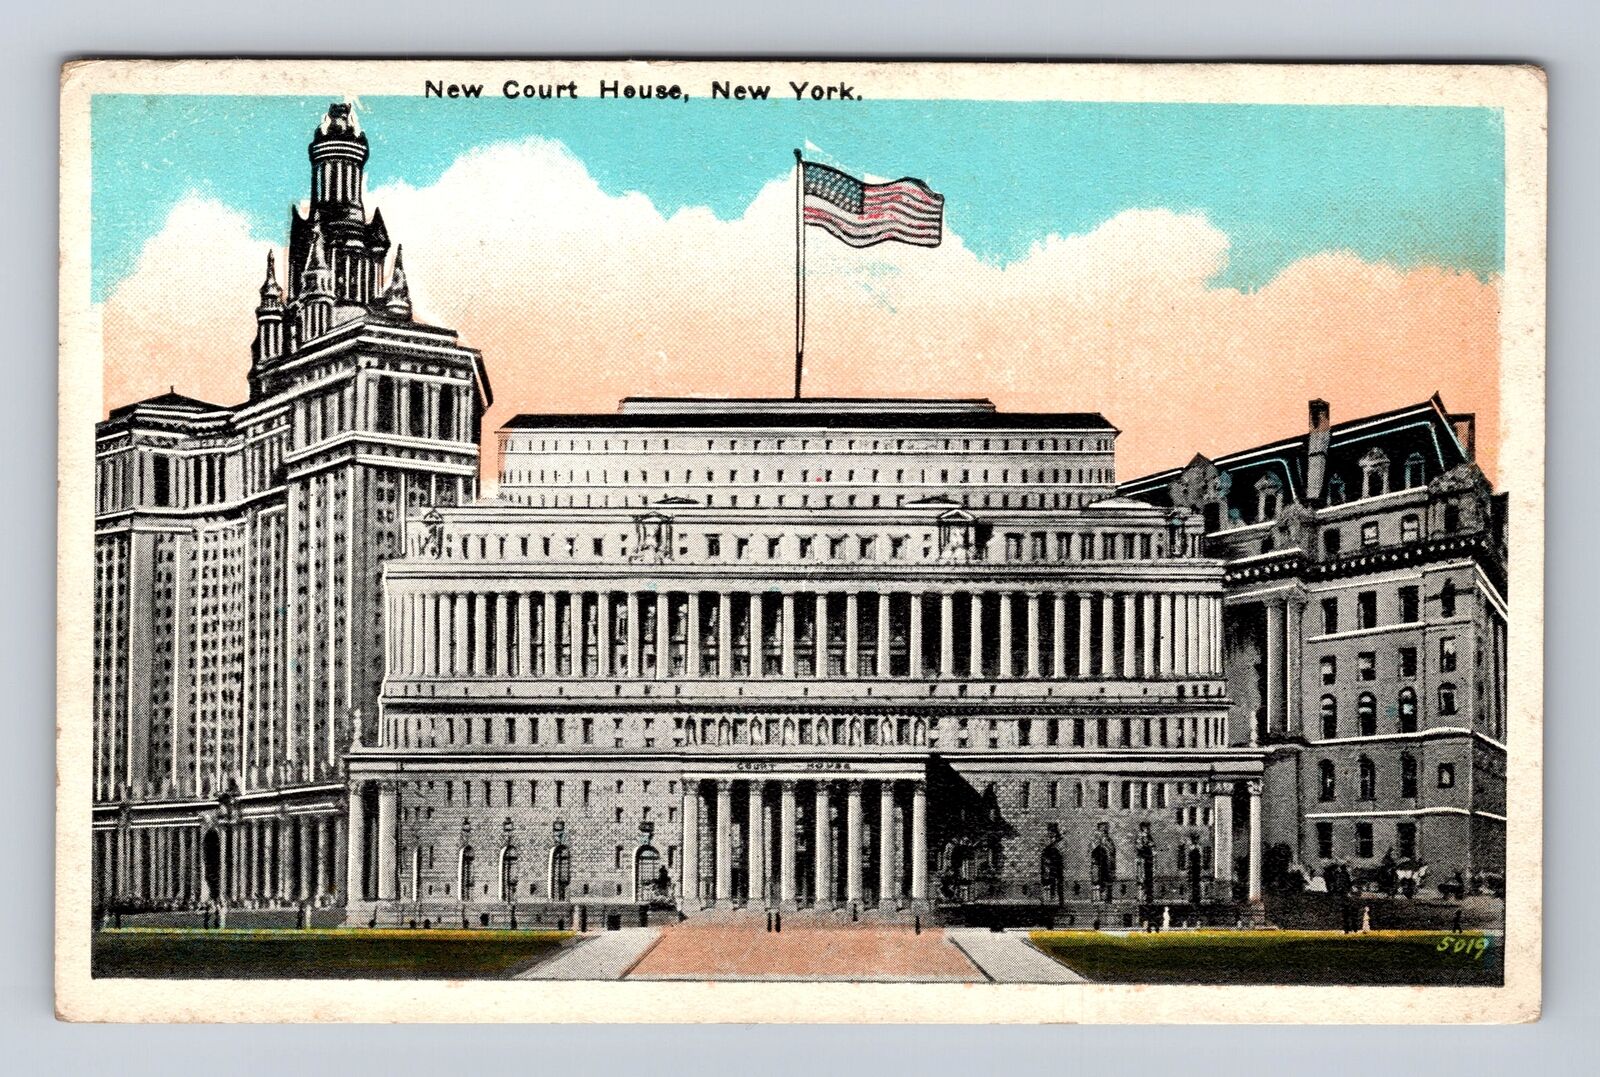 New York City- NY, New Court House, Circular Building, Antique Vintage Postcard